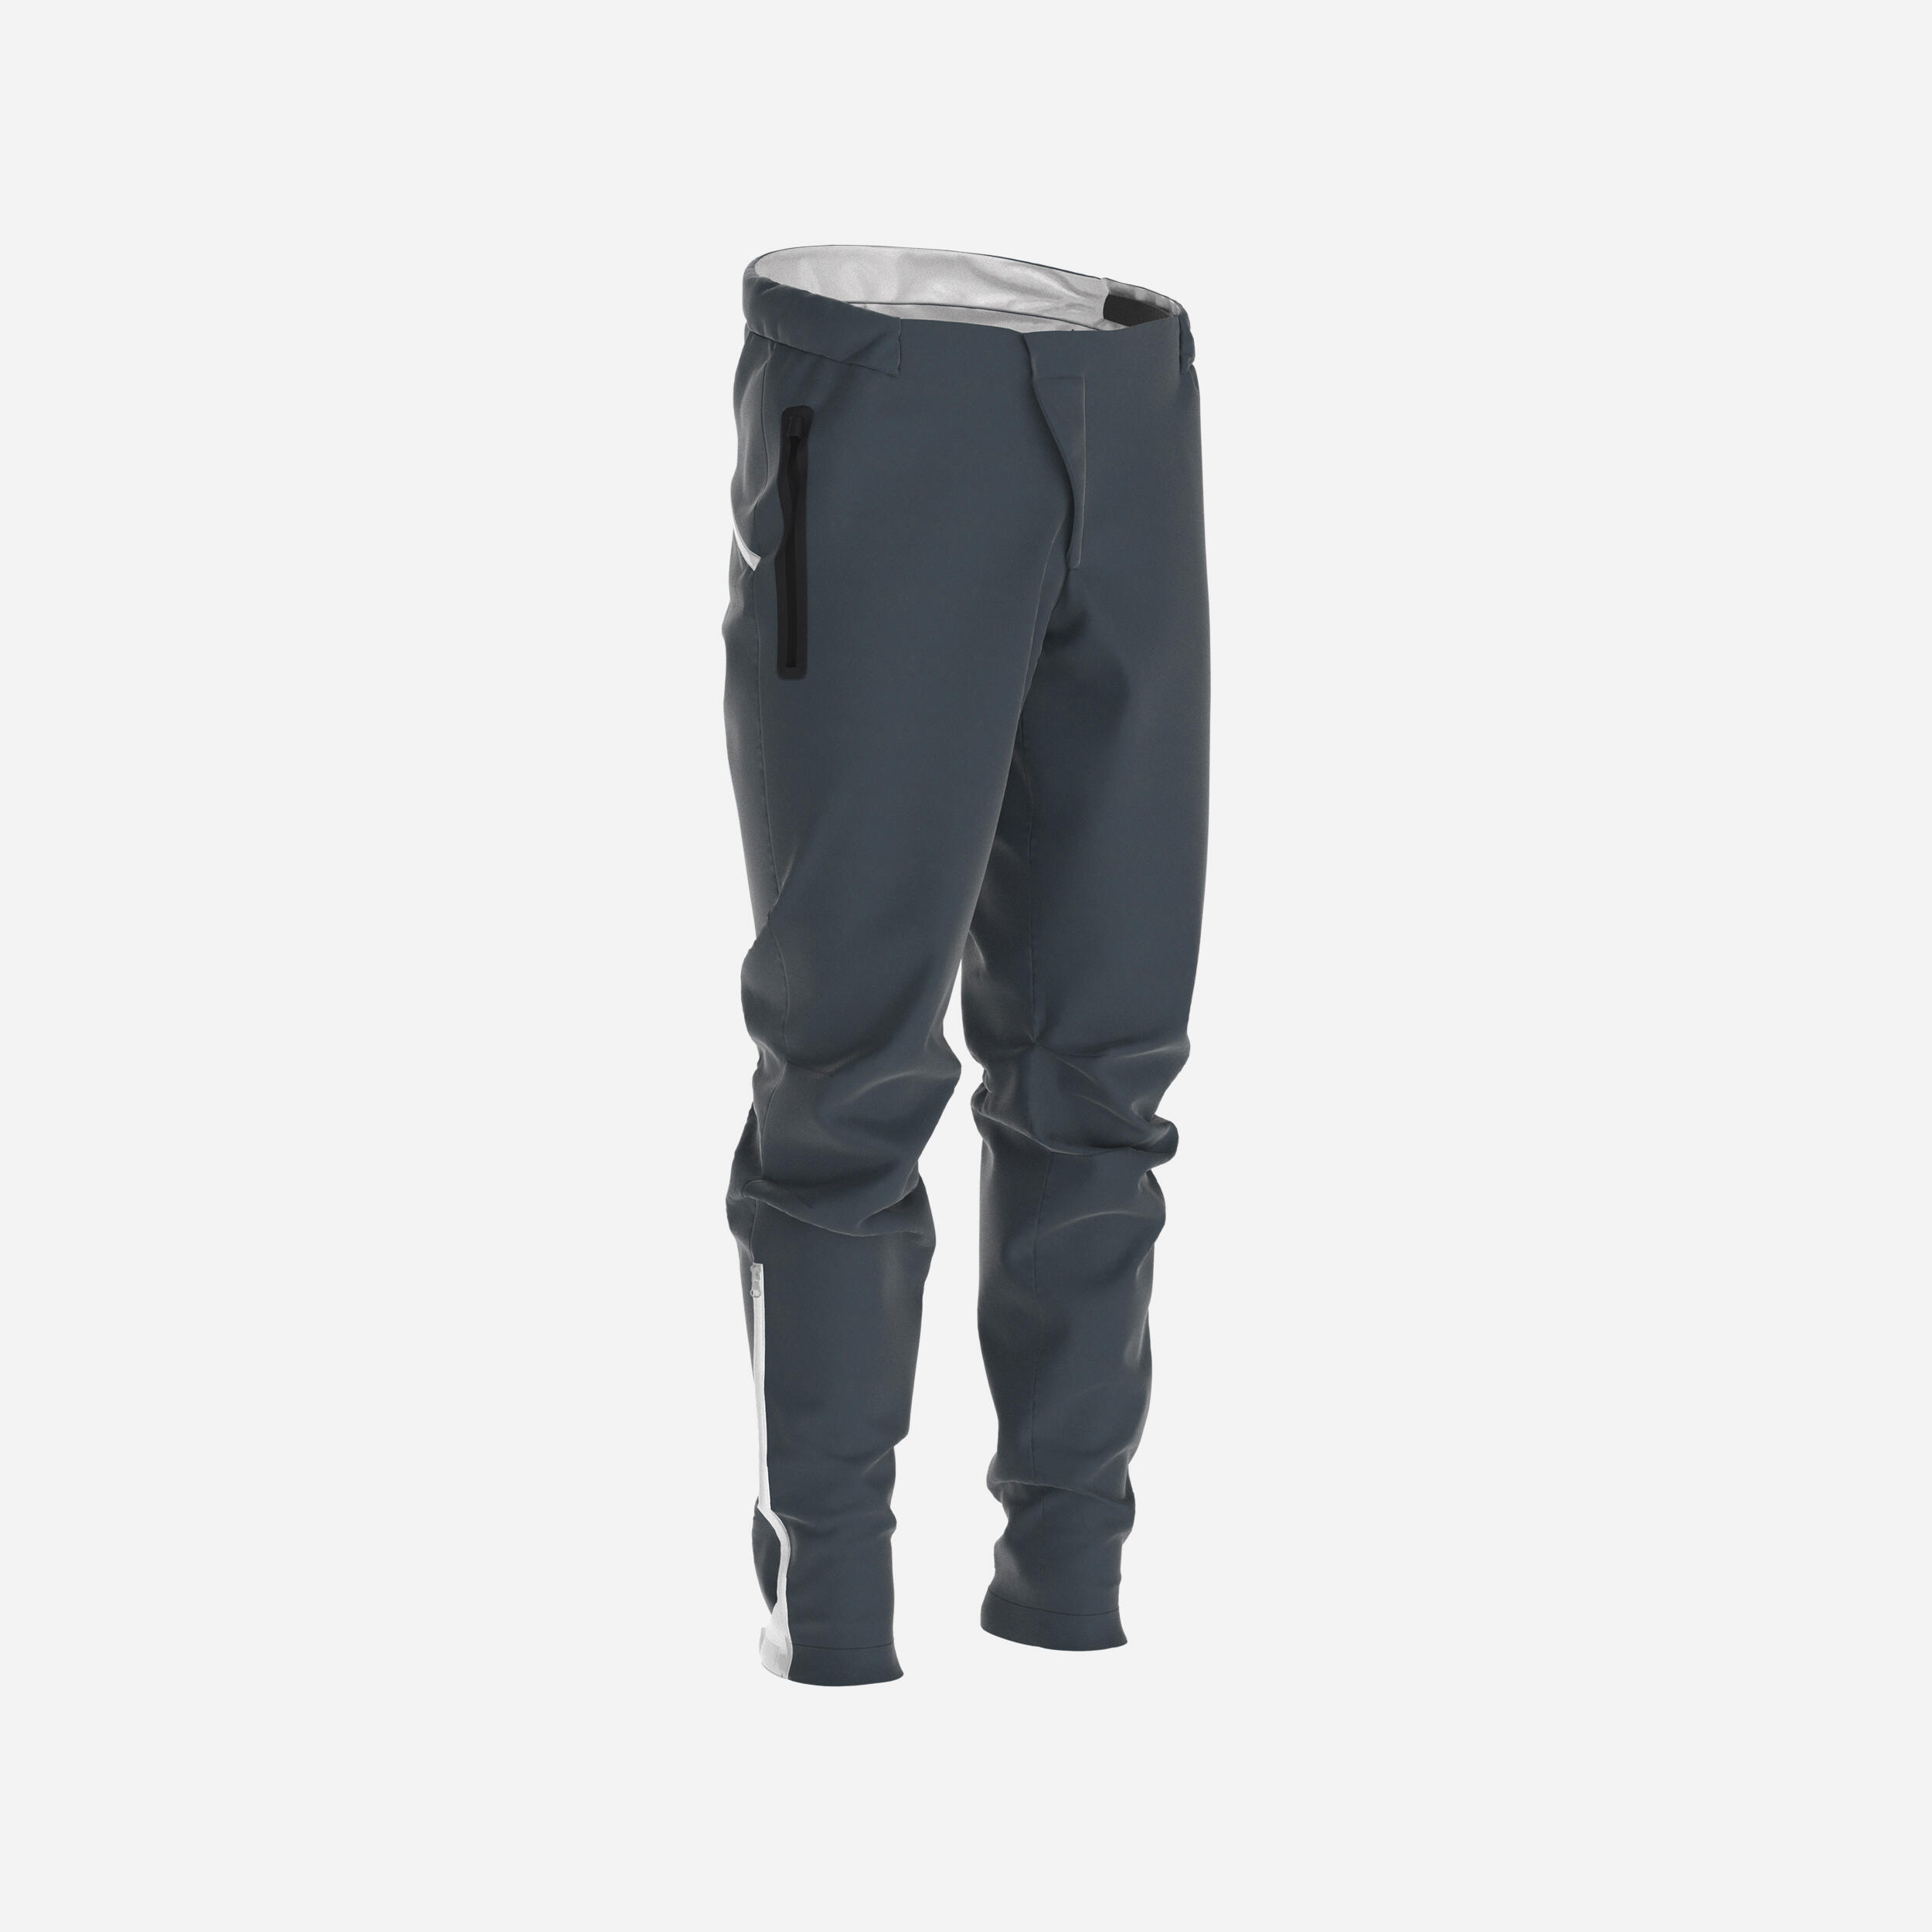 Buy Decathlon Kids Grey Ski Warm and Waterproof Trousers from the Laura  Ashley online shop